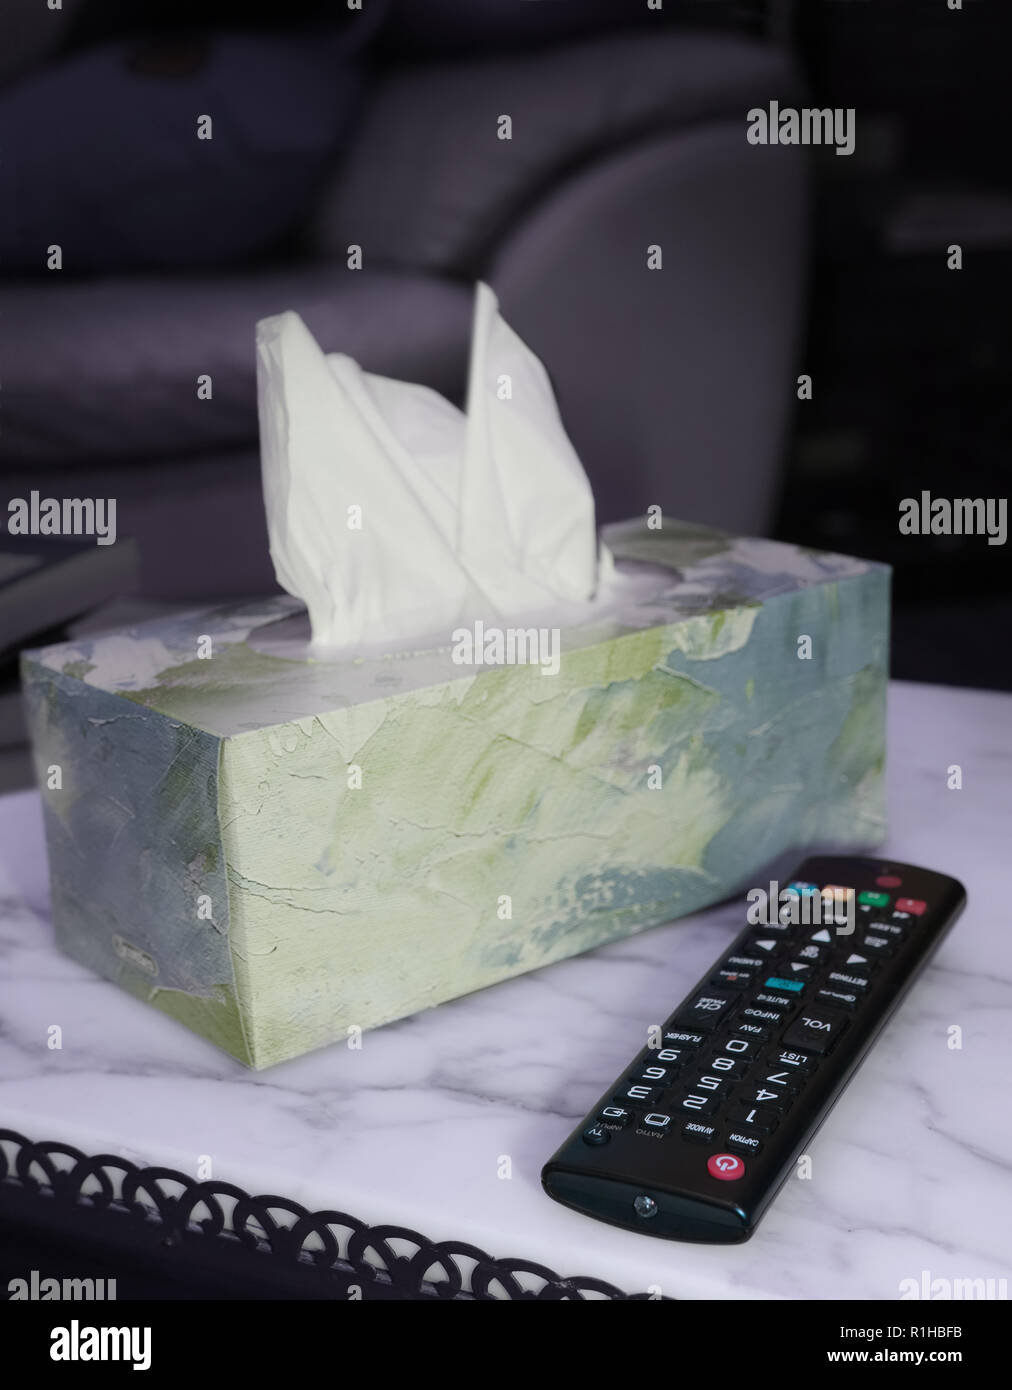 On the marble table there is a remote control and a box of tissues. The scene is illuminated by the TV screen. Stock Photo